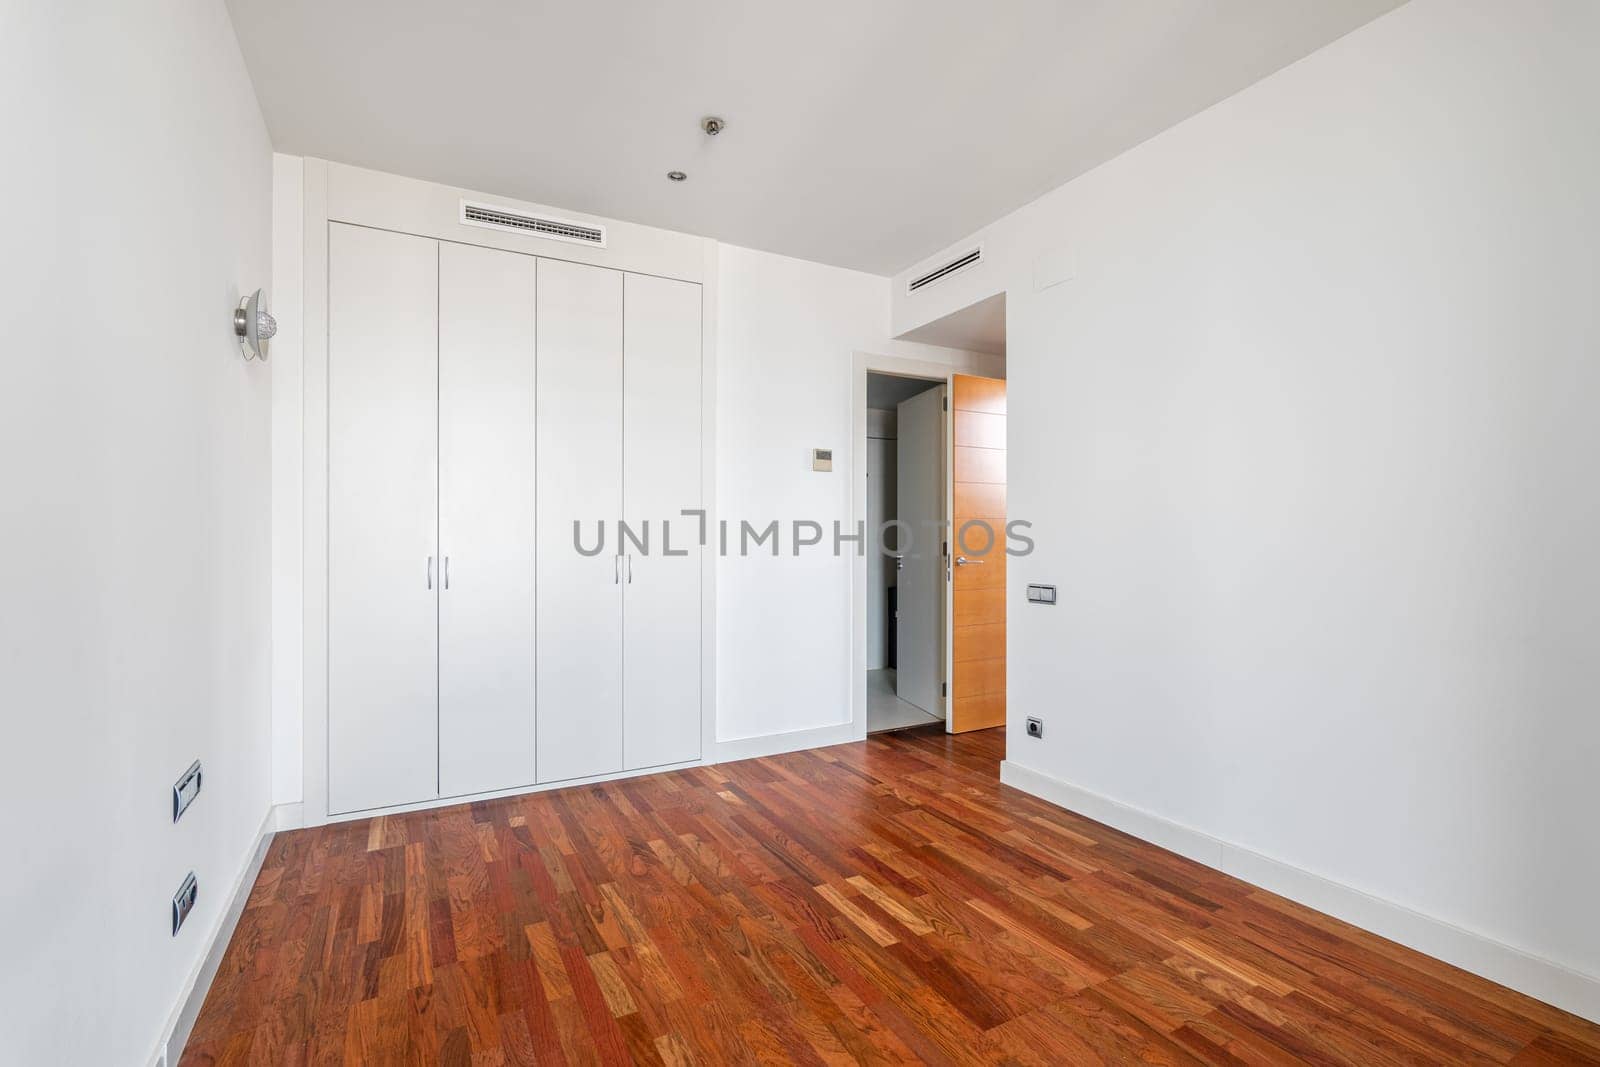 Interior of empty apartment, white room with built-in wardrobe and parquet floor.